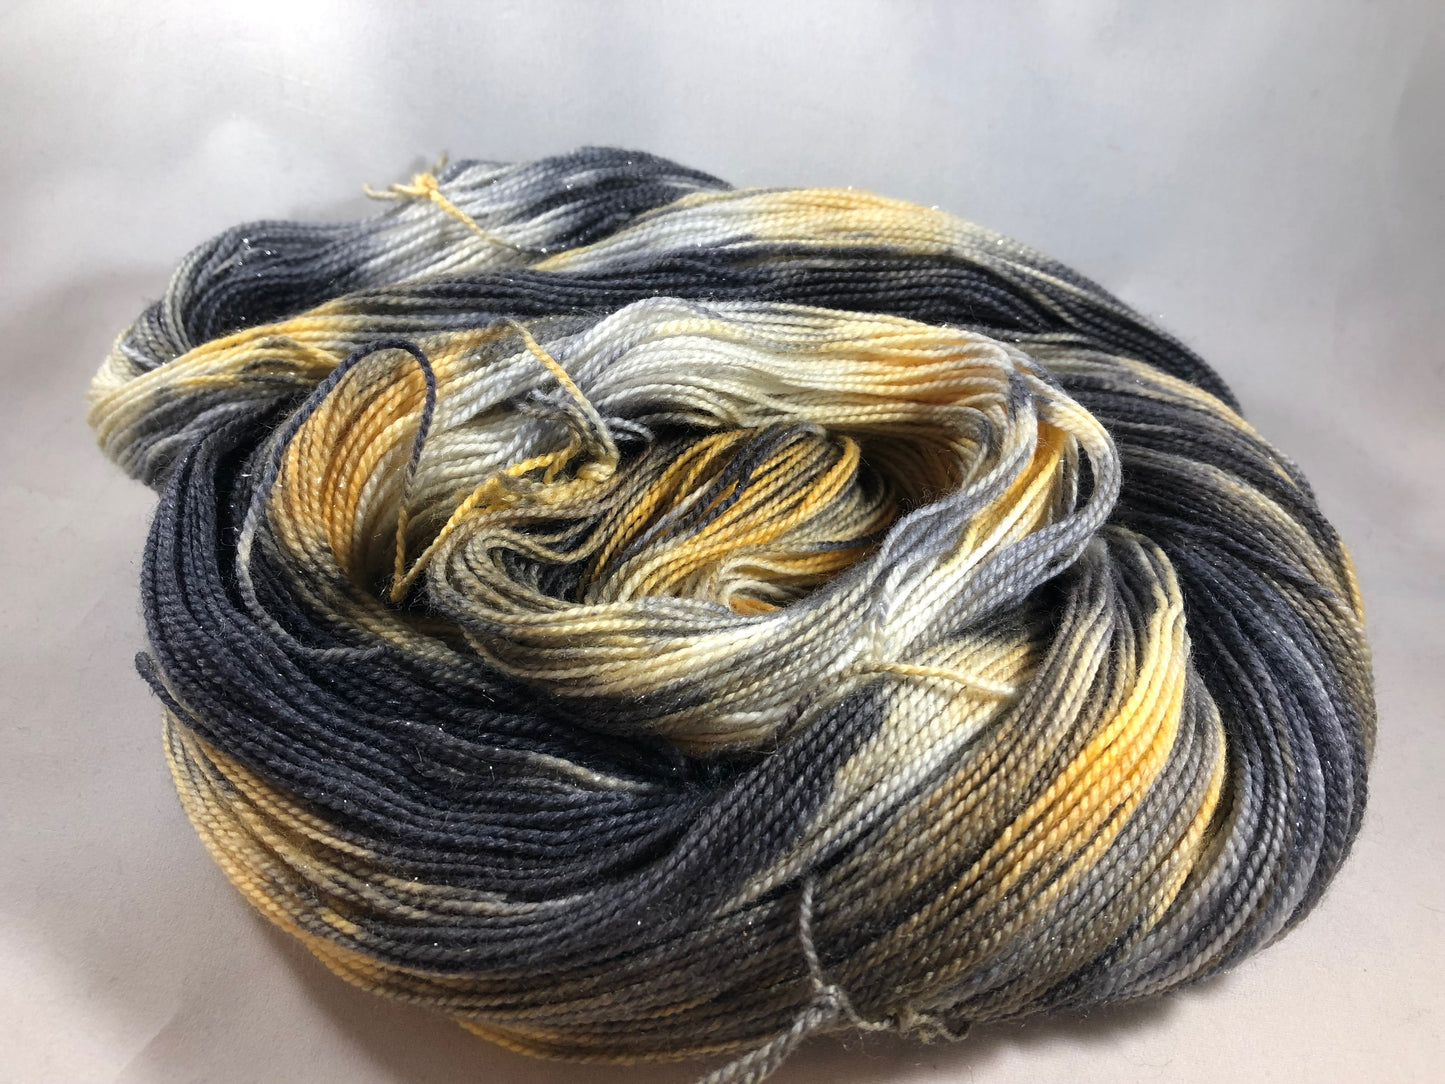 DISCONTINUED - Mummy's Twist - Ready to Ship